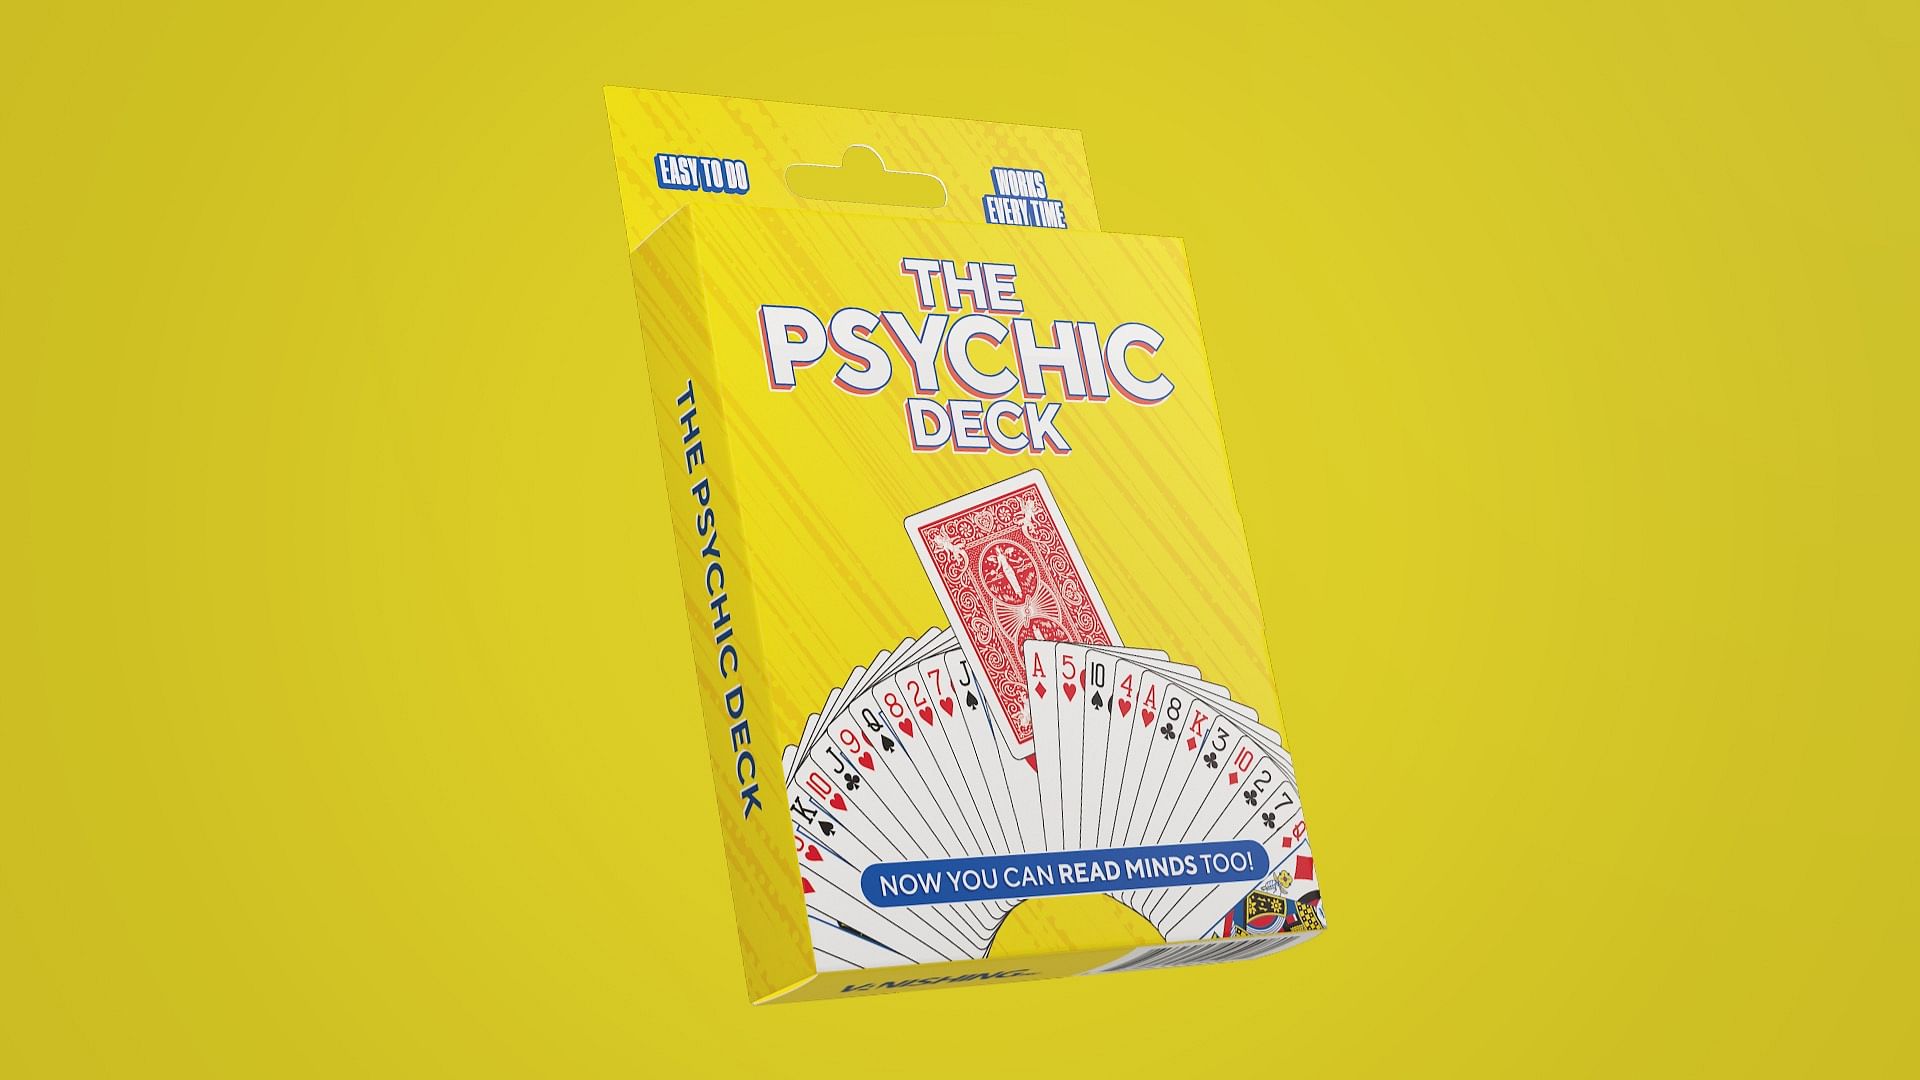 The Psychic Deck